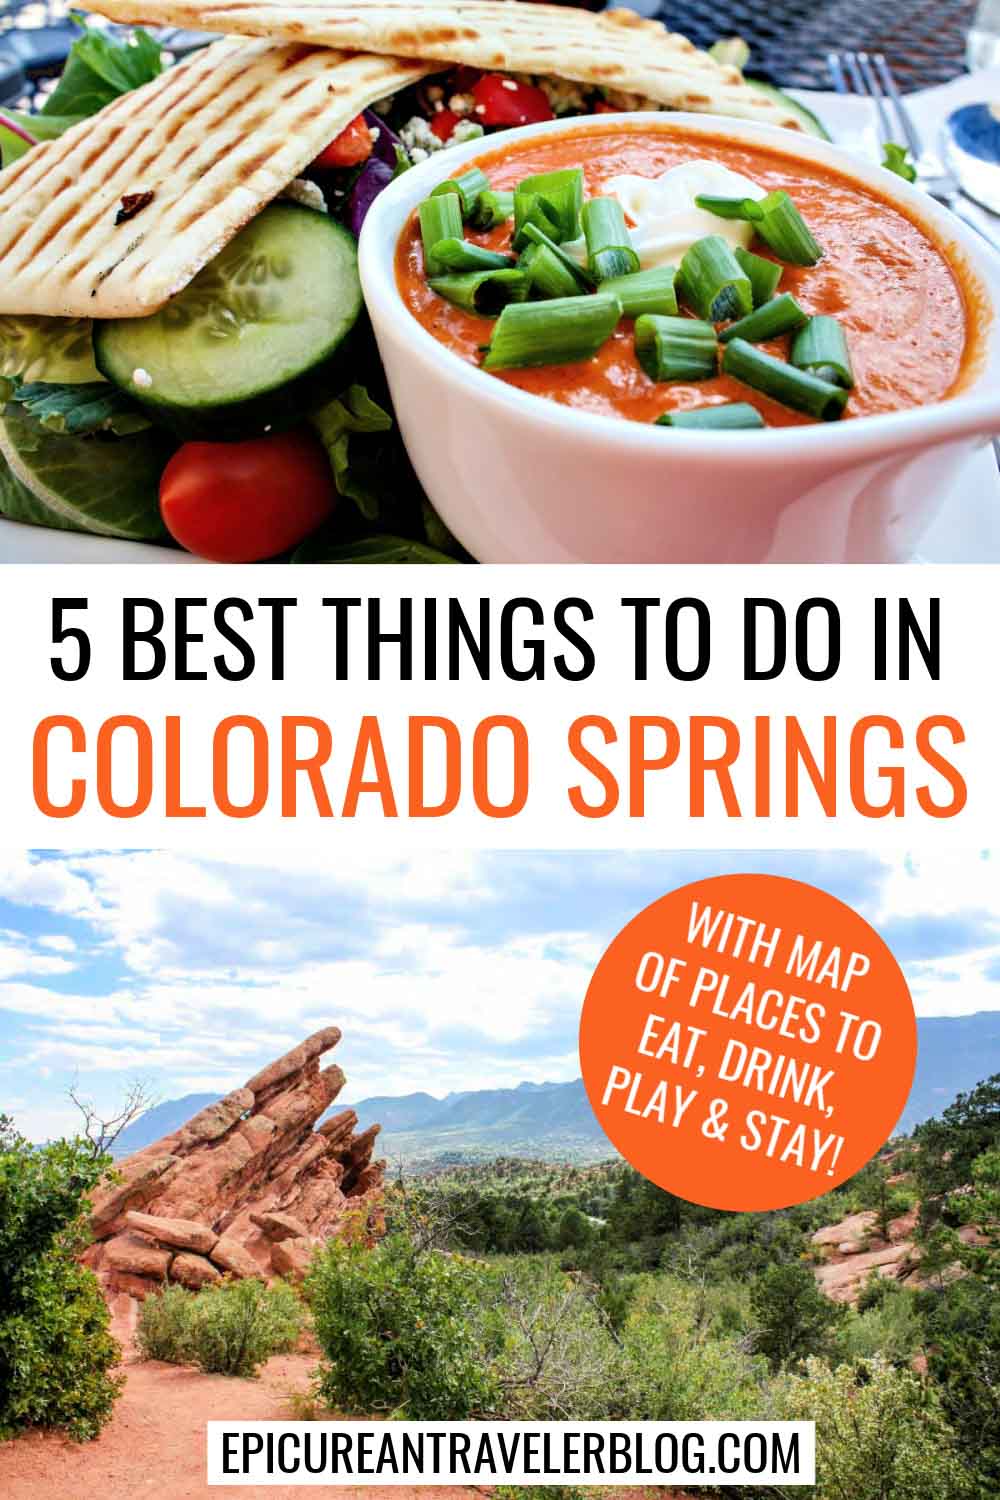 5 Best Things to Do in Colorado Springs with map to points of interest, hotels, and restaurants